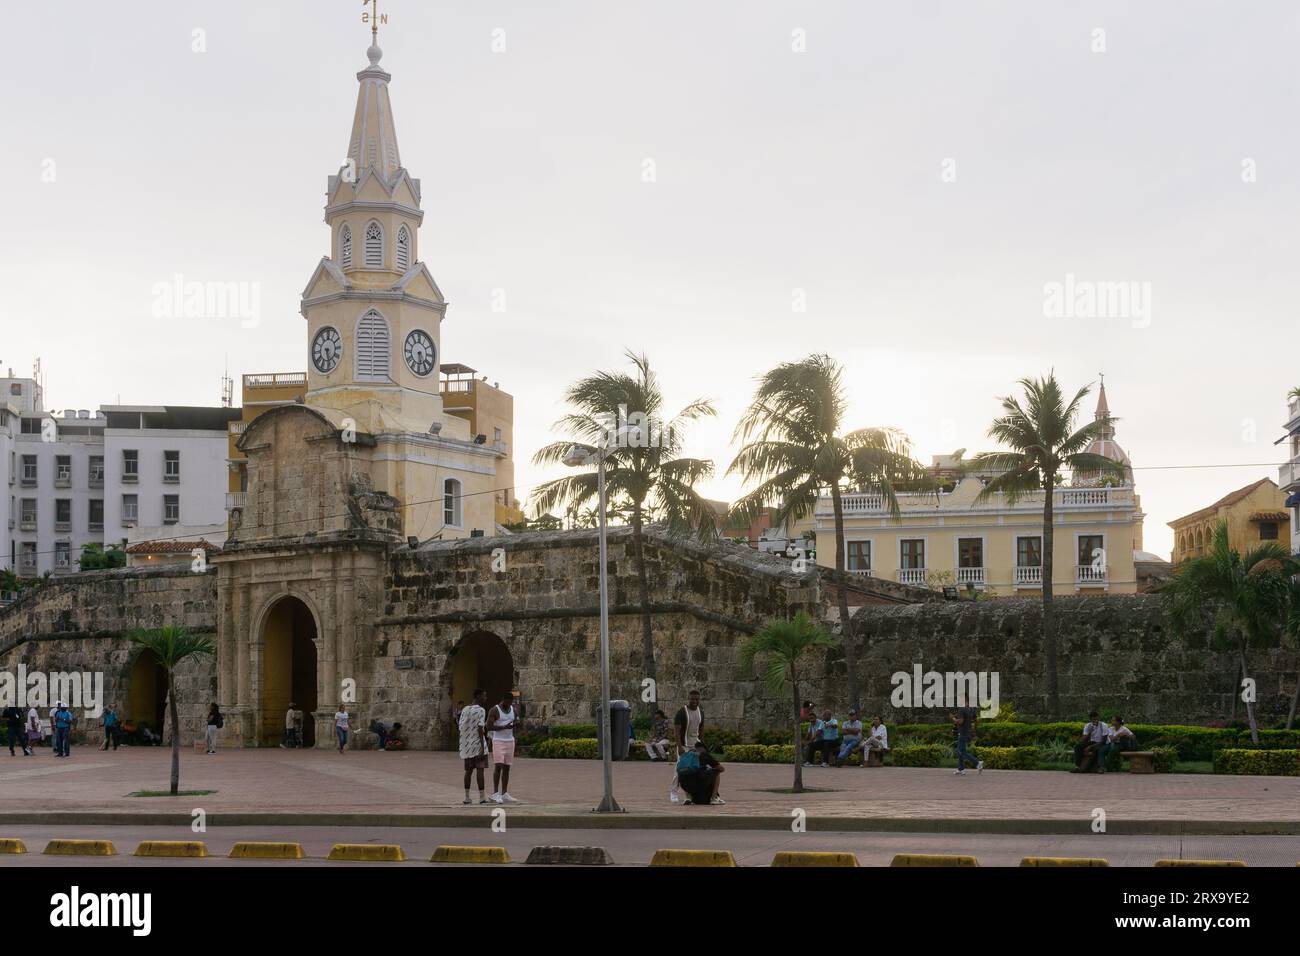 Cartagena, Colombia - View of the clock tower (Torre del Reloj) outside the Old Town walls. Stock Photo